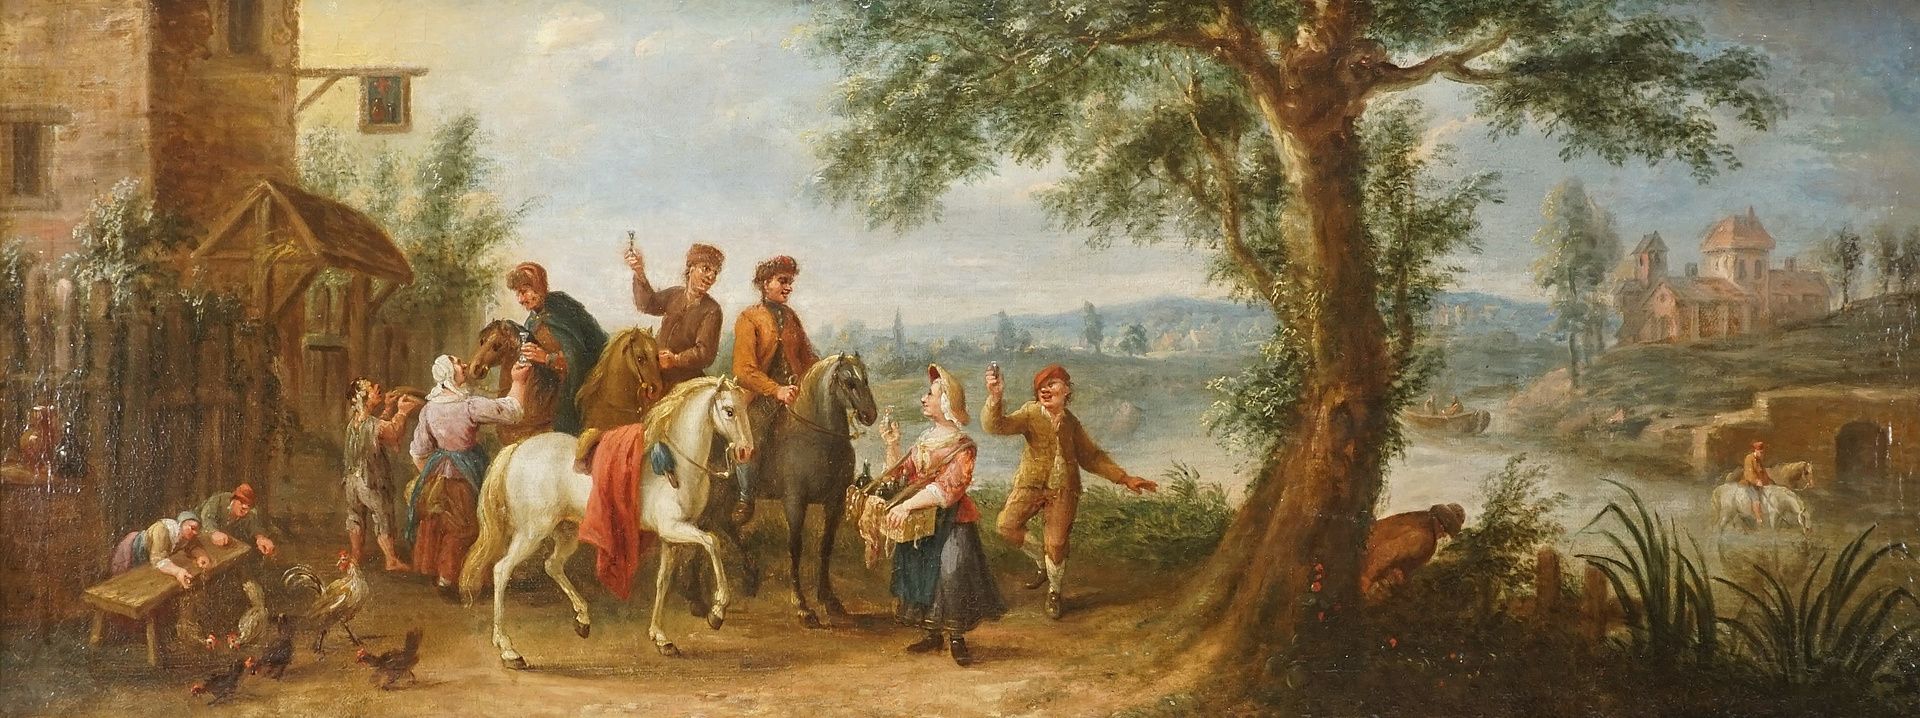 Jacques Guillaume van Blarenberghe (1691-1742), Riders in front of a tavern by the river